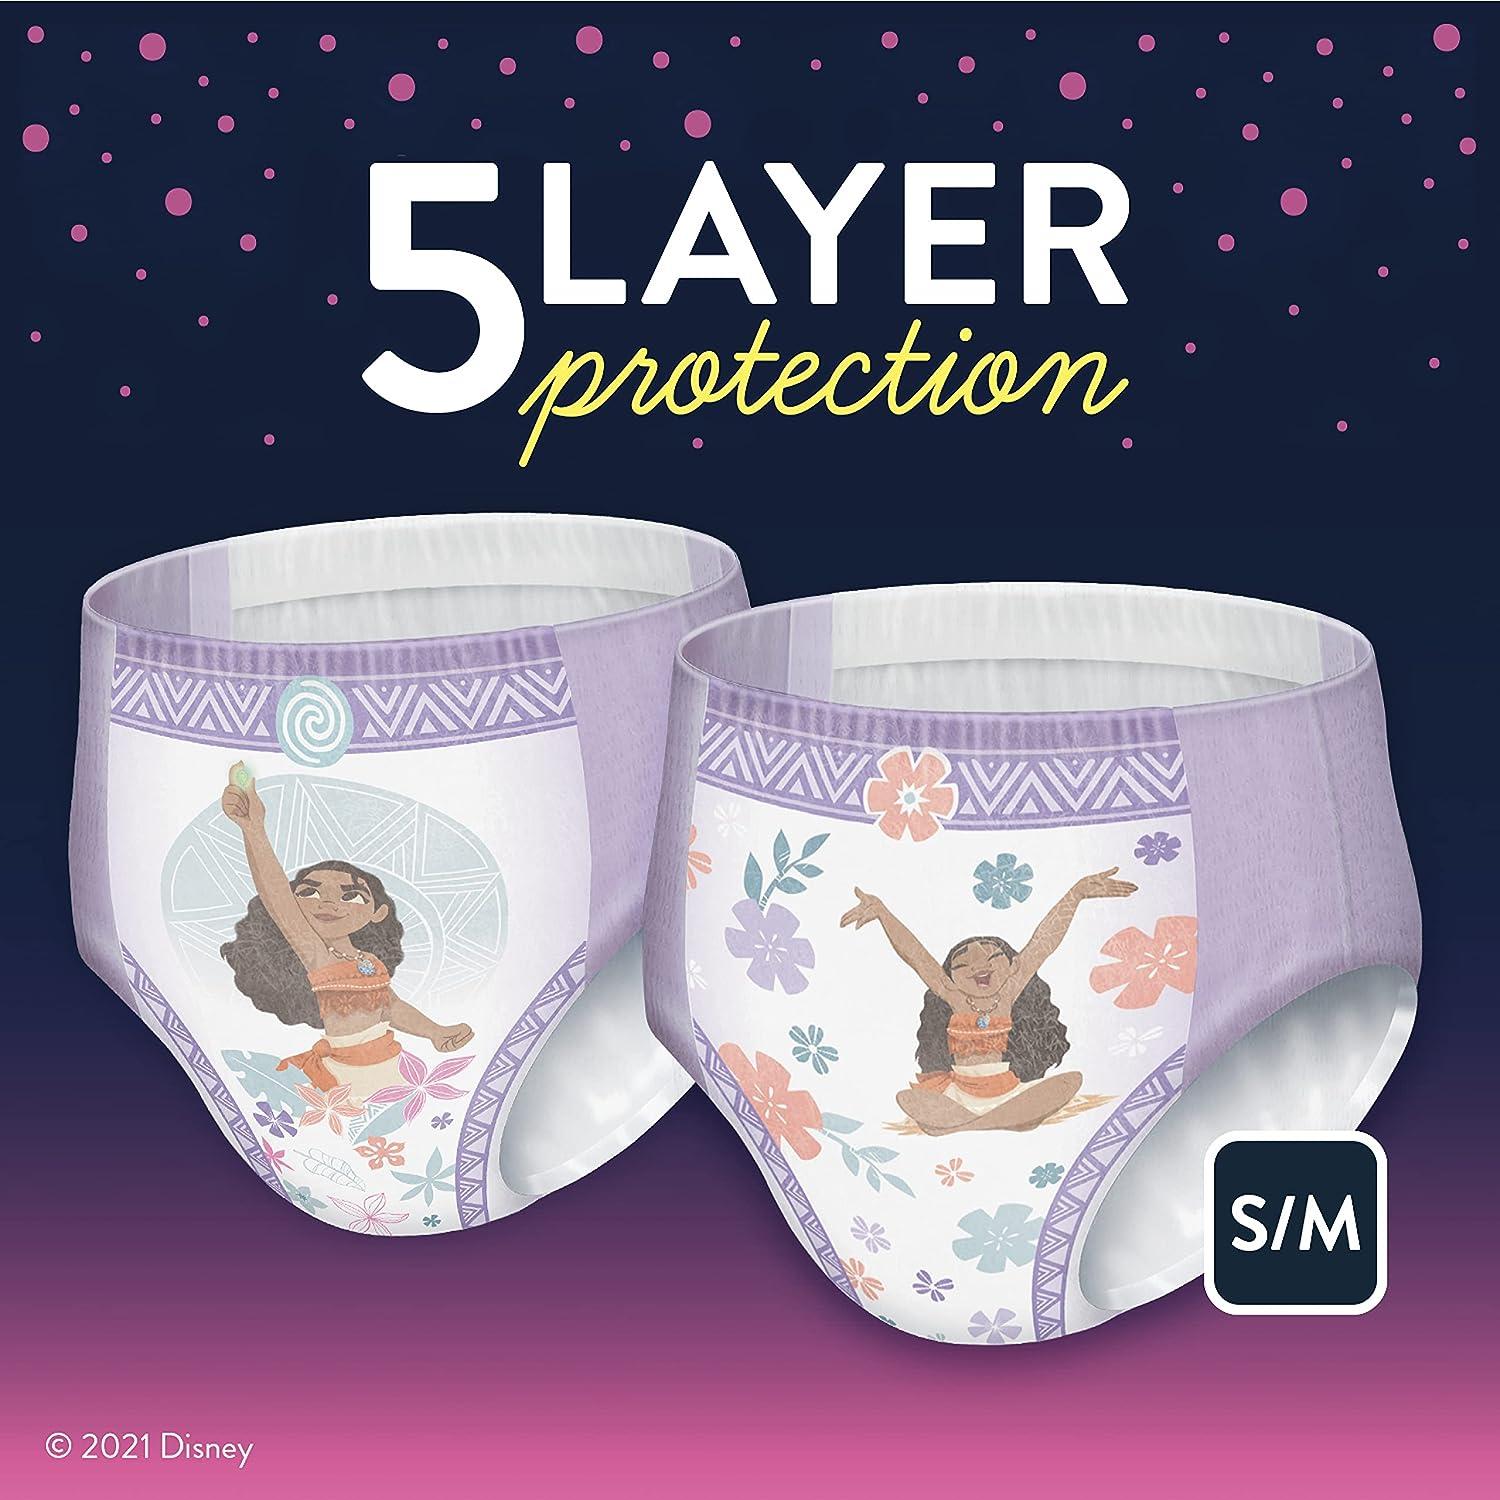 Goodnites Youth Pants Underwear for Girls